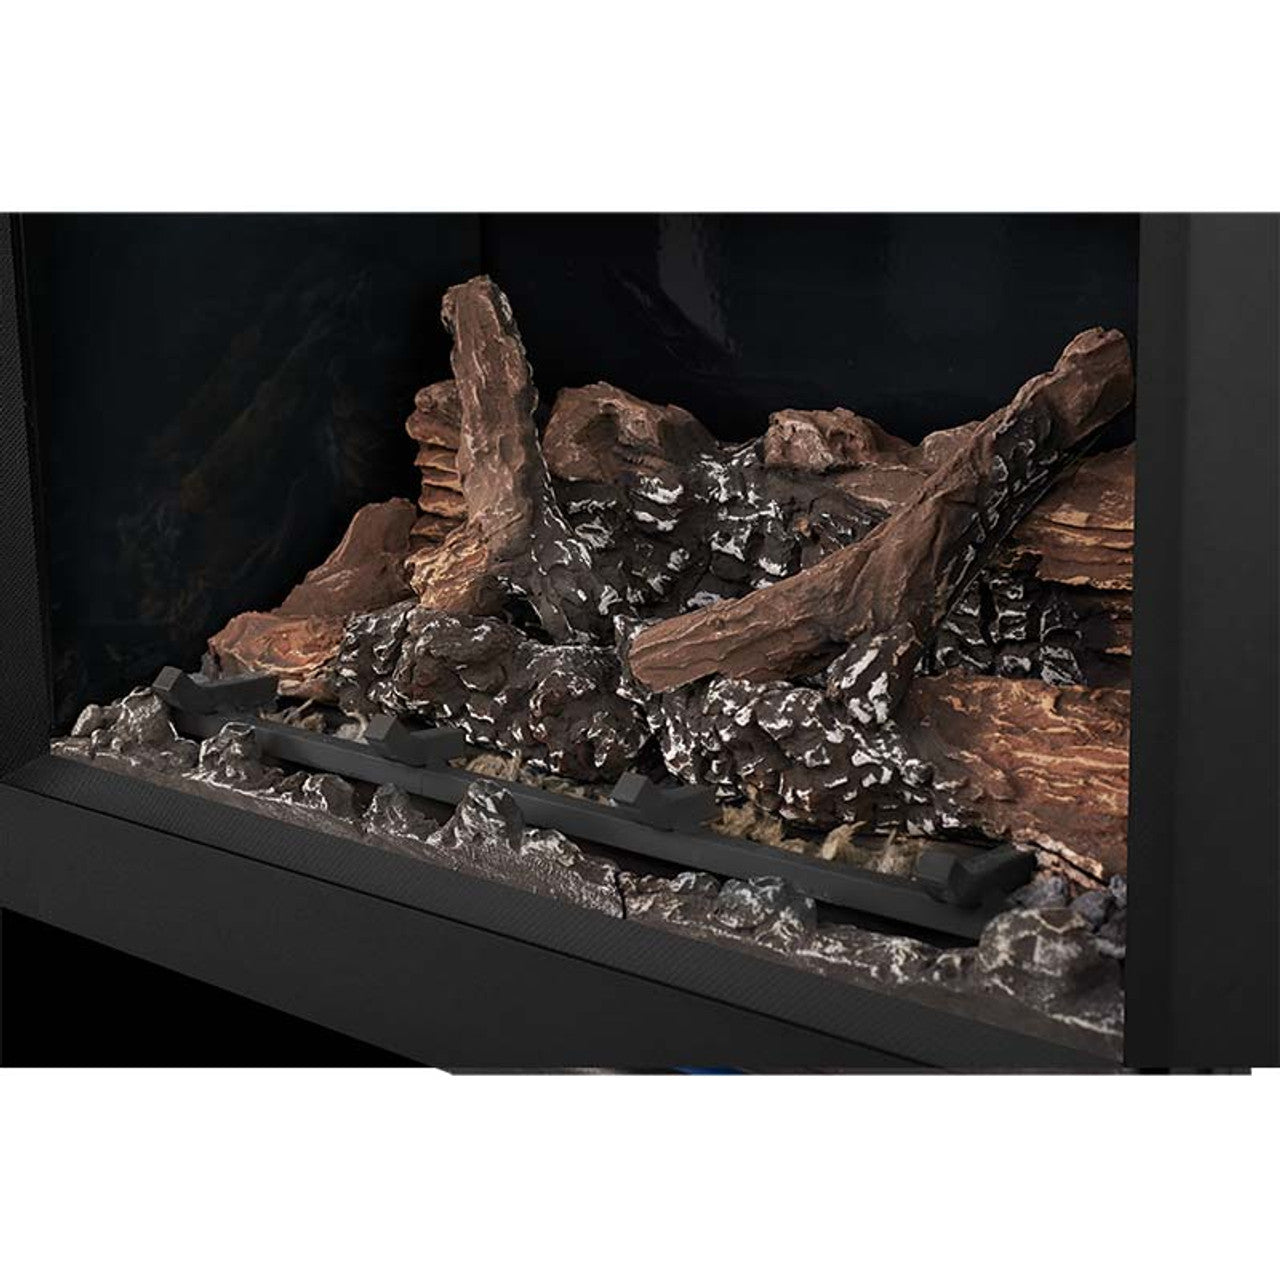 Napoleon OAKVILLE X4 Direct Vent Electronic Ignition Natural Gas Fireplace Insert - GDIX4N-1 - Chimney Cricket